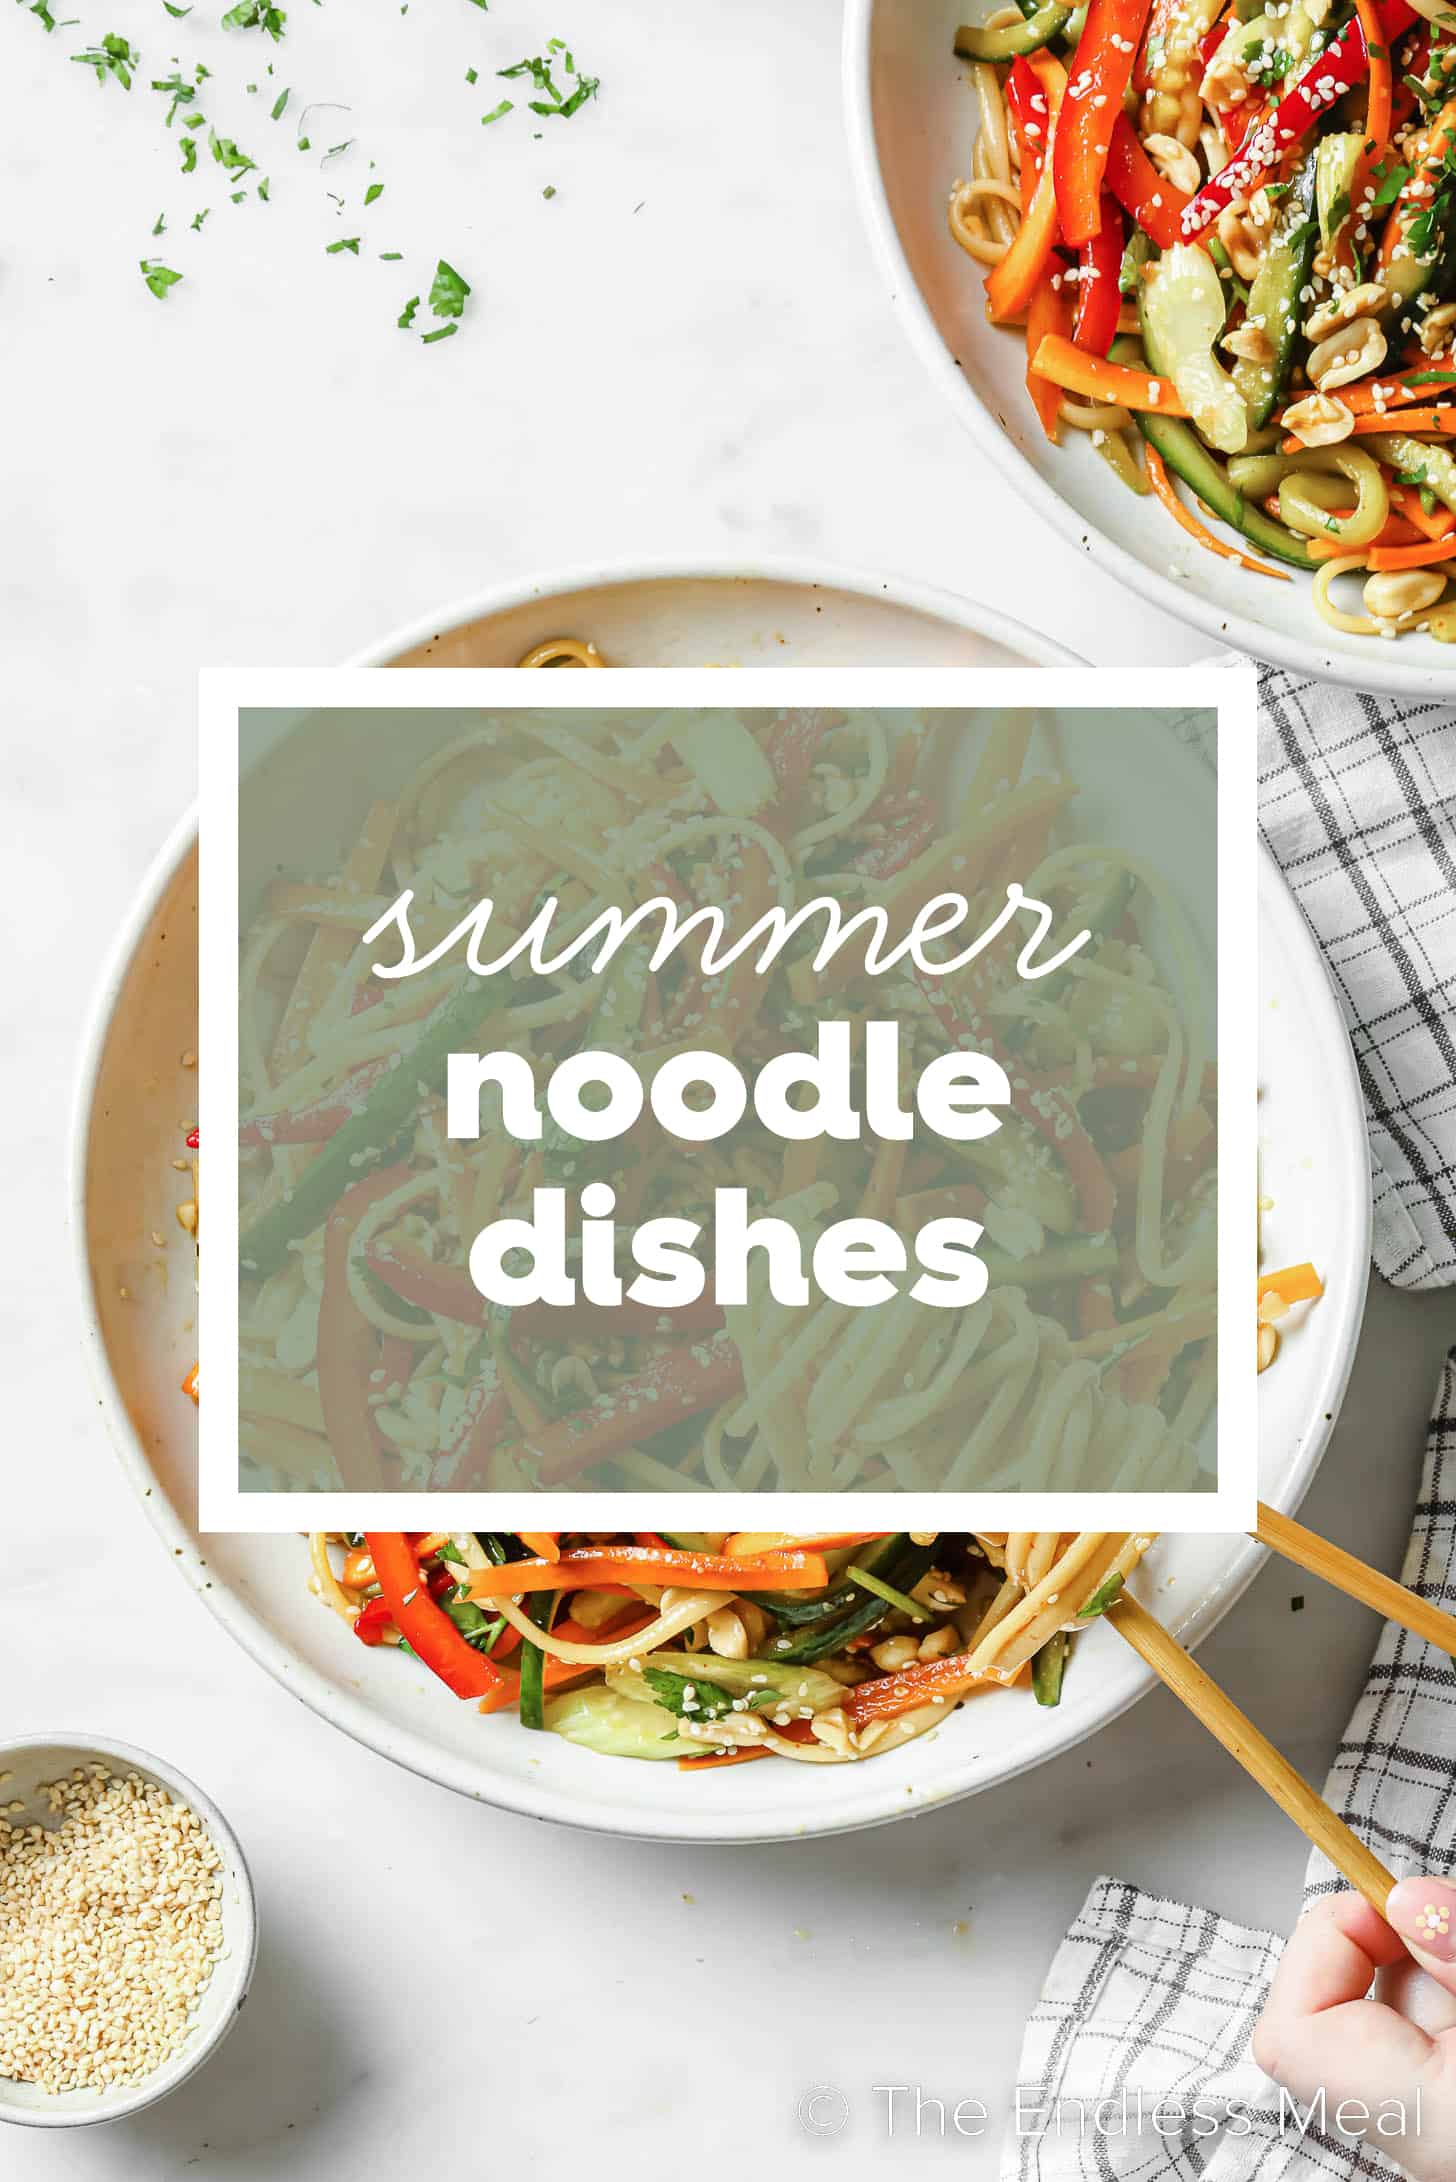 Summer noodle salad with the words Summer Noodle Dishes on top.